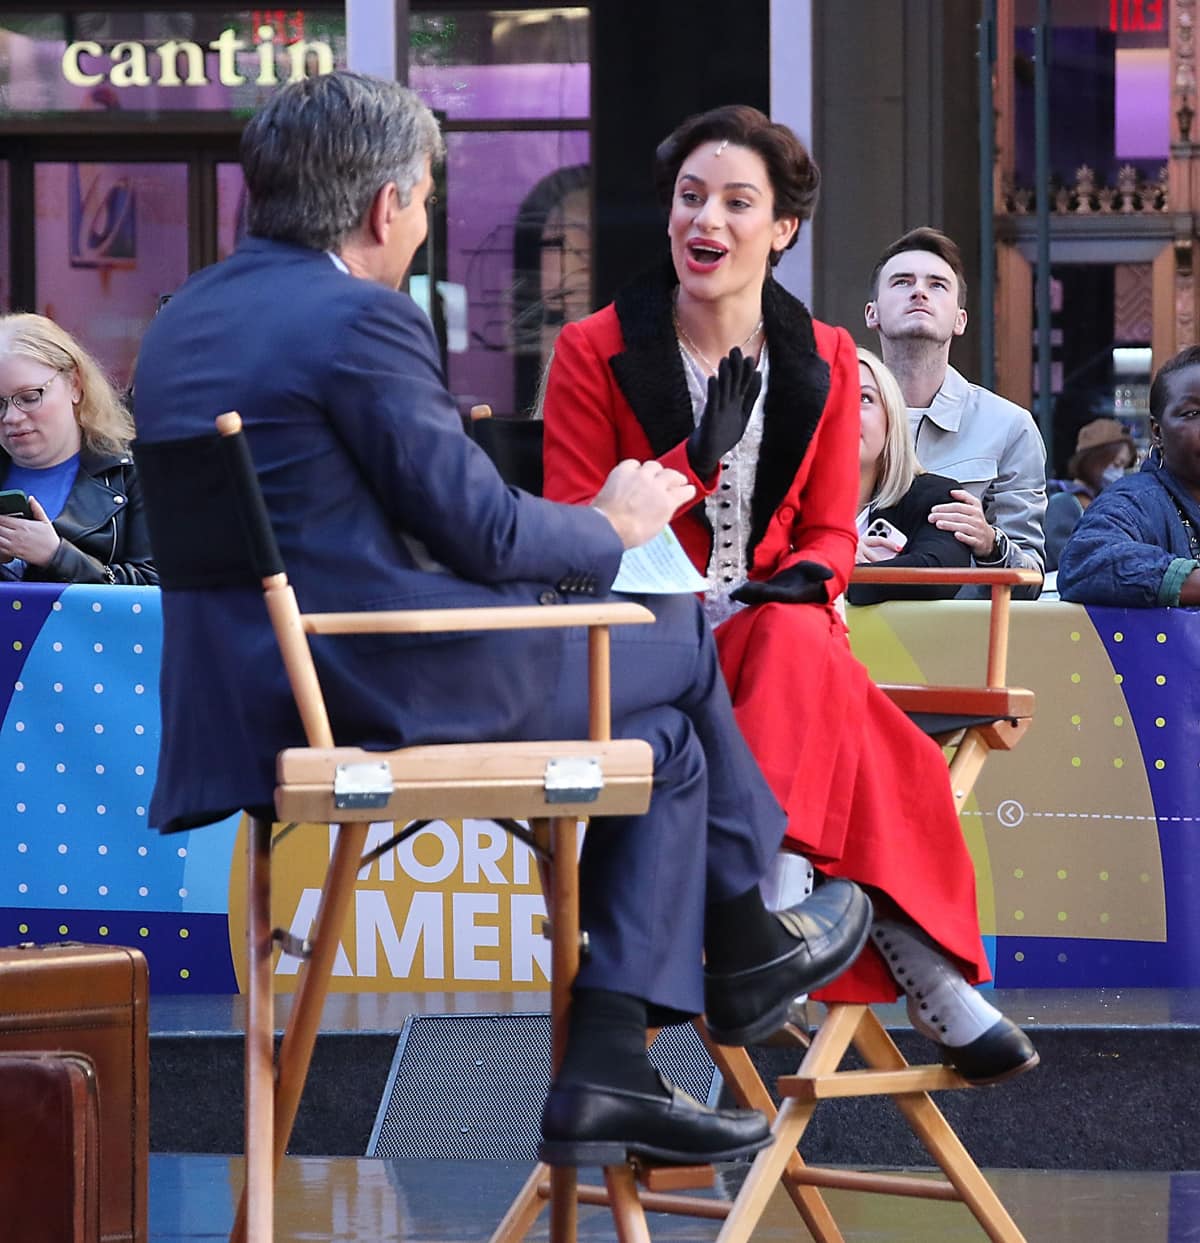 Lea Michele appeared on Good Morning America to perform the classic song “Don’t Rain on My Parade” from the Broadway musical Funny Girl